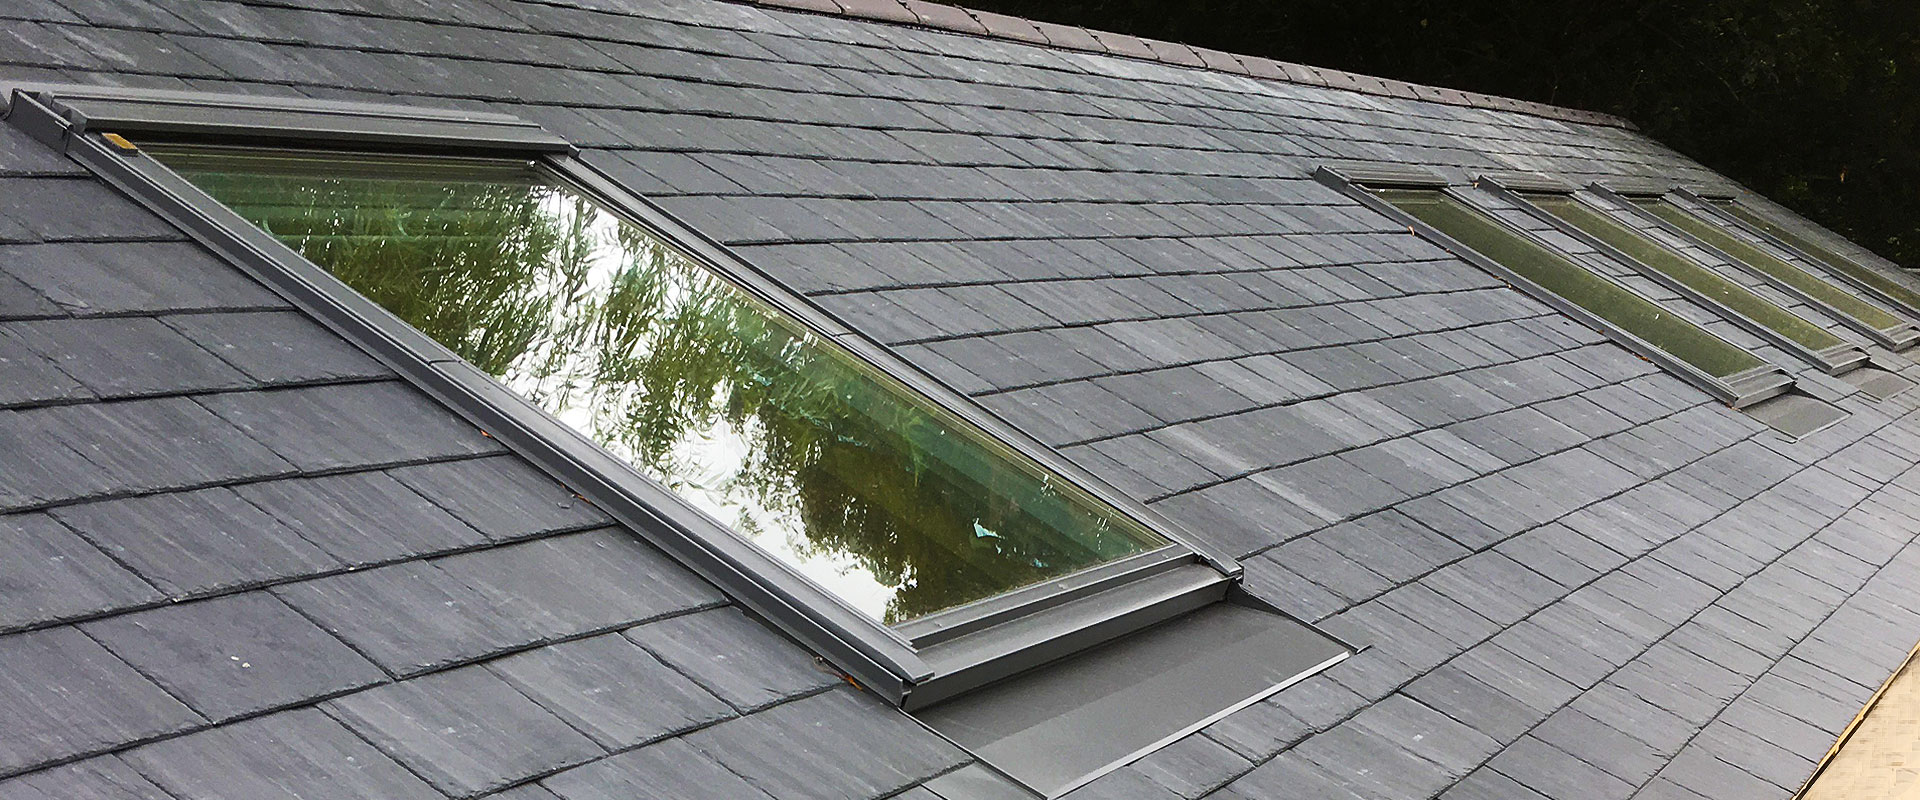 New lead roof and rooflight by Lavisher Building and Roofing